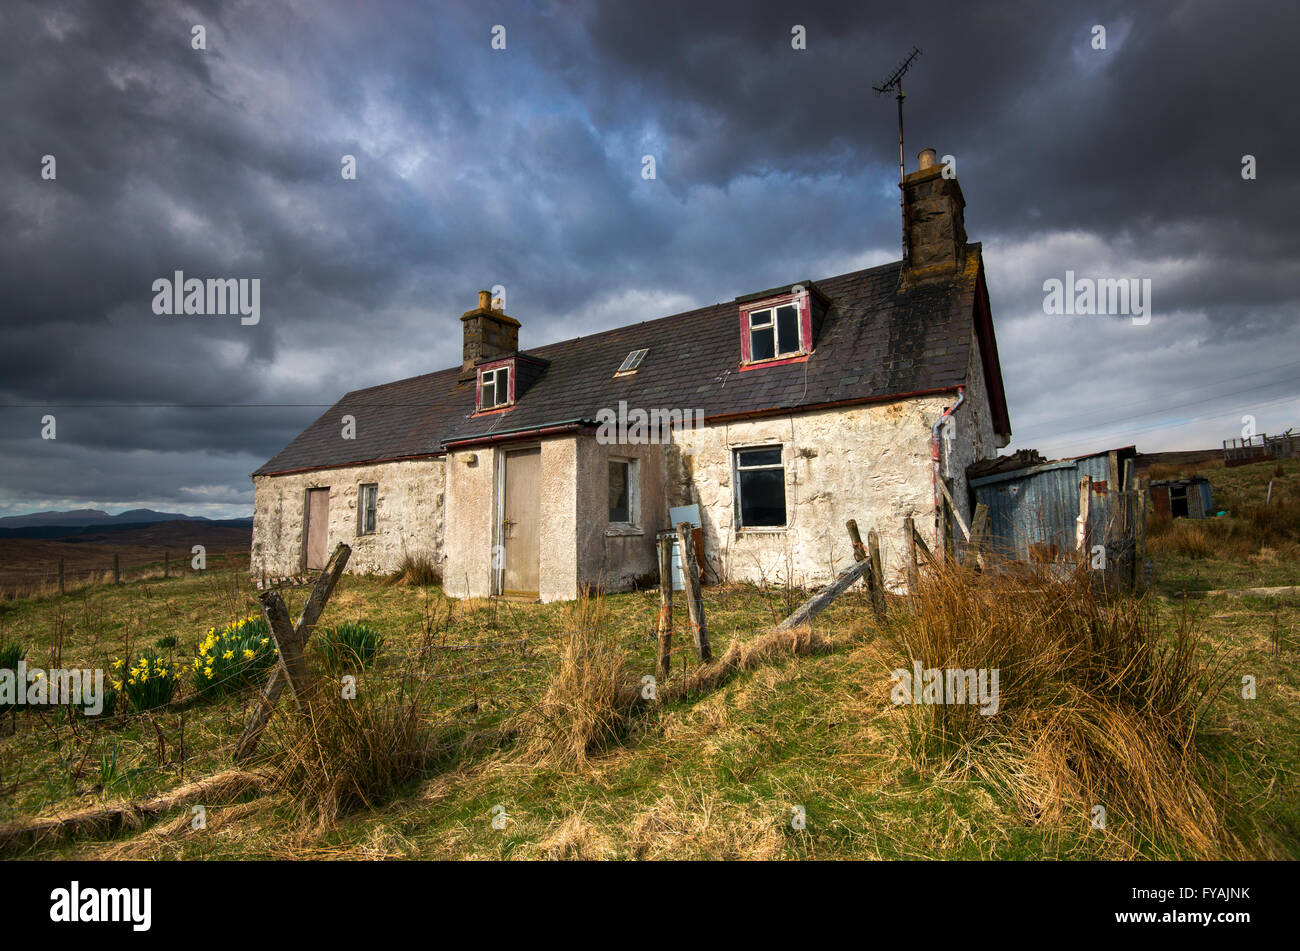 A deserted crofters cottage, bathed in dramatic afternoon light, Sutherland Scotland UK Stock Photo